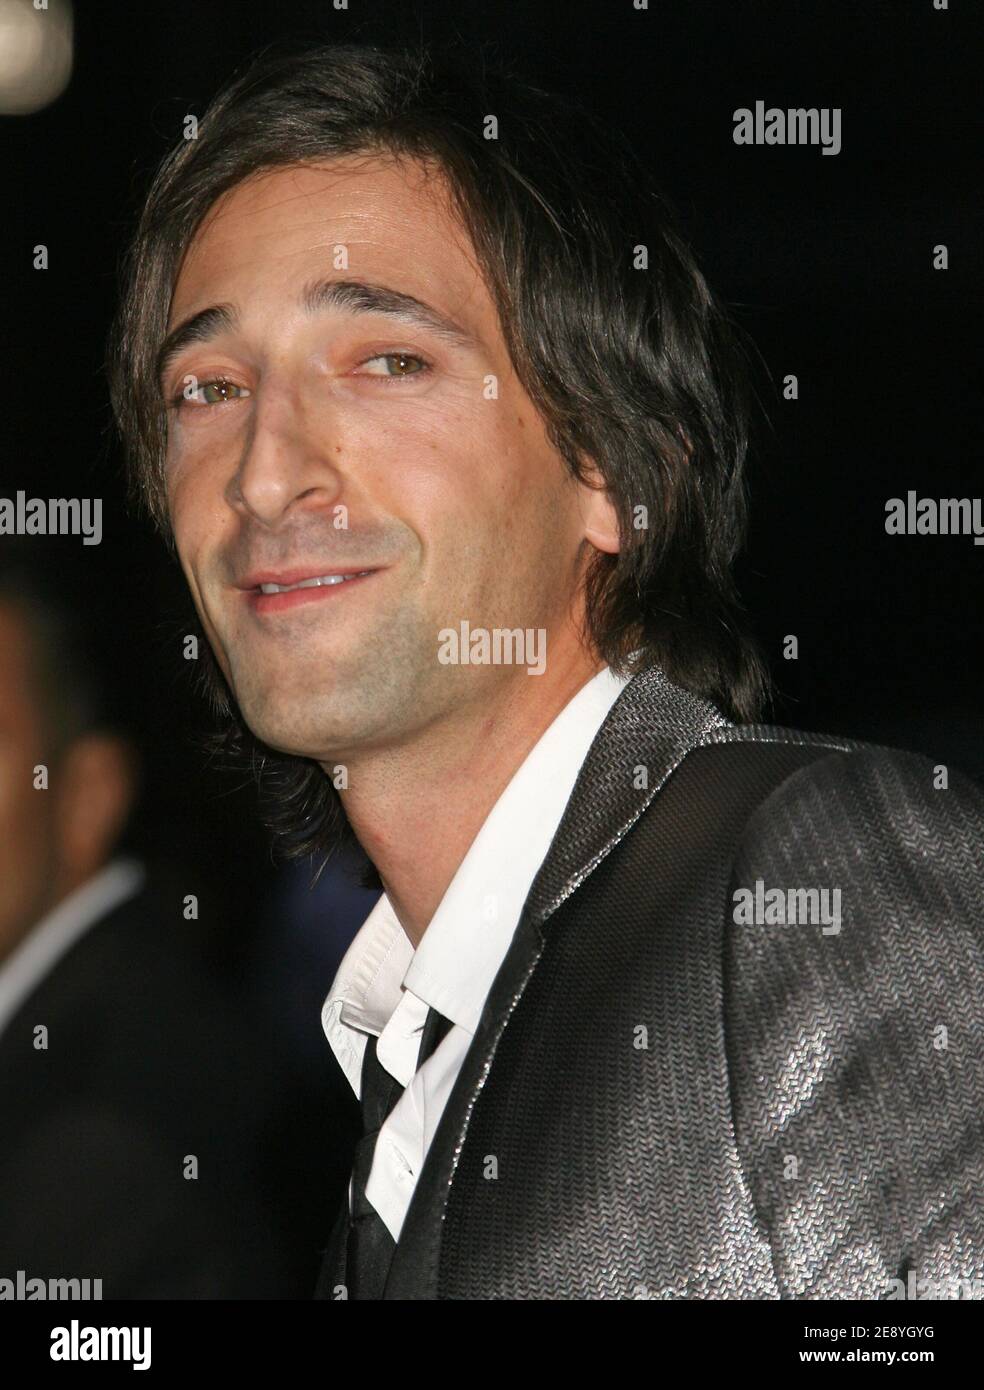 Actor Adrien Brody, a cast member in the motion picture dramatic comedy  The Darjeeling Limited, arrives for the premiere of the film at the  Academy of Motion Picture Arts & Sciences in